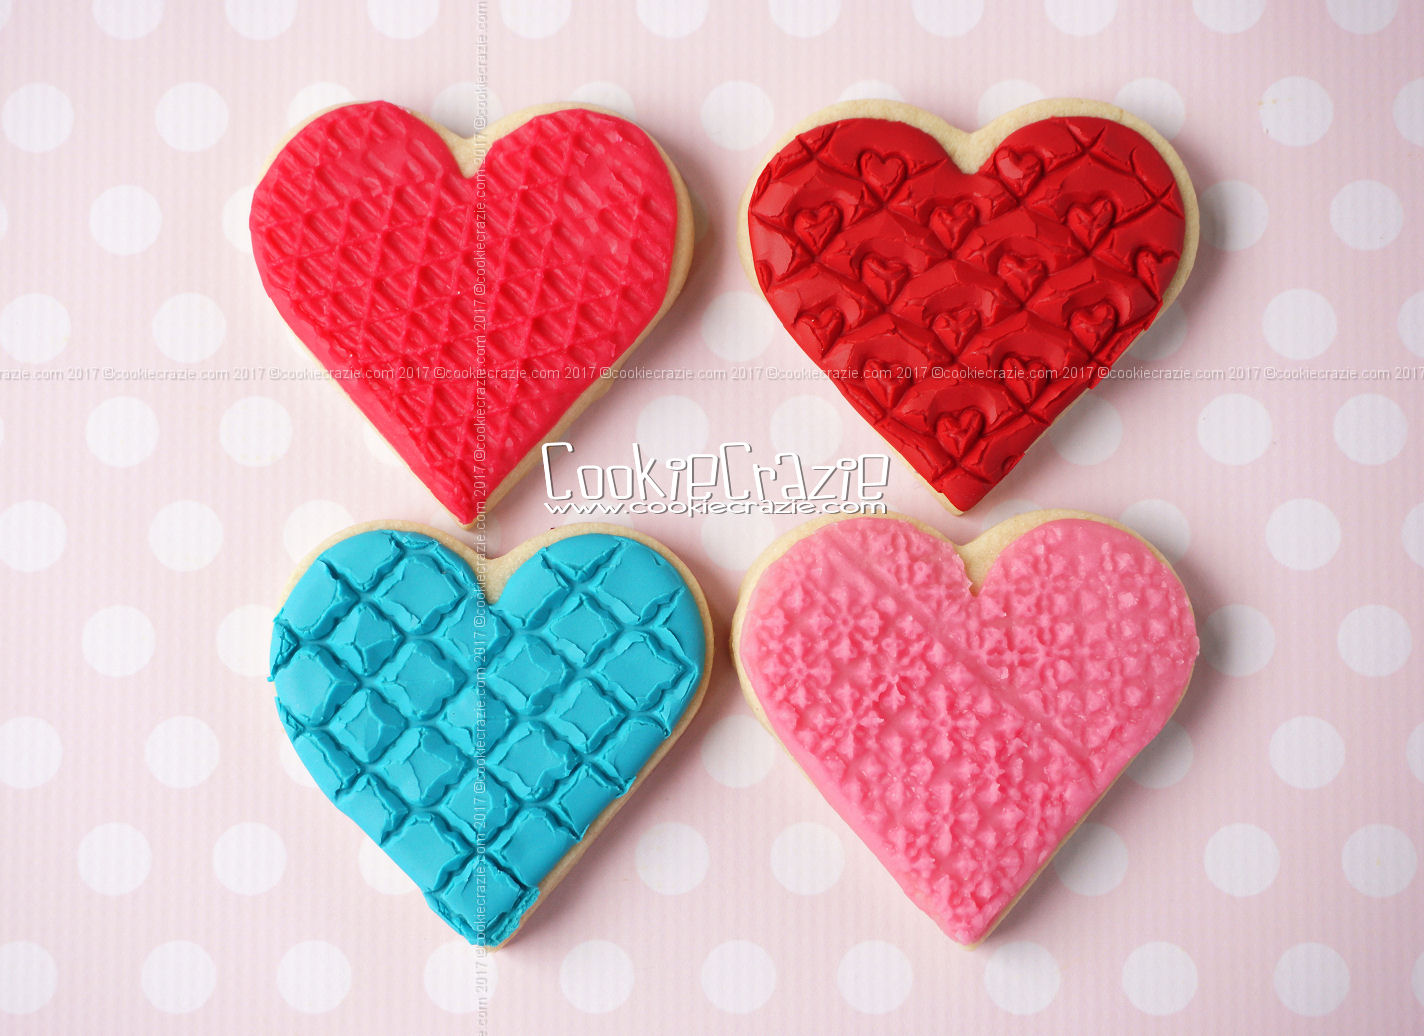  Textured Valentines Heart Decorated Sugar Cookies YouTube video  HERE  